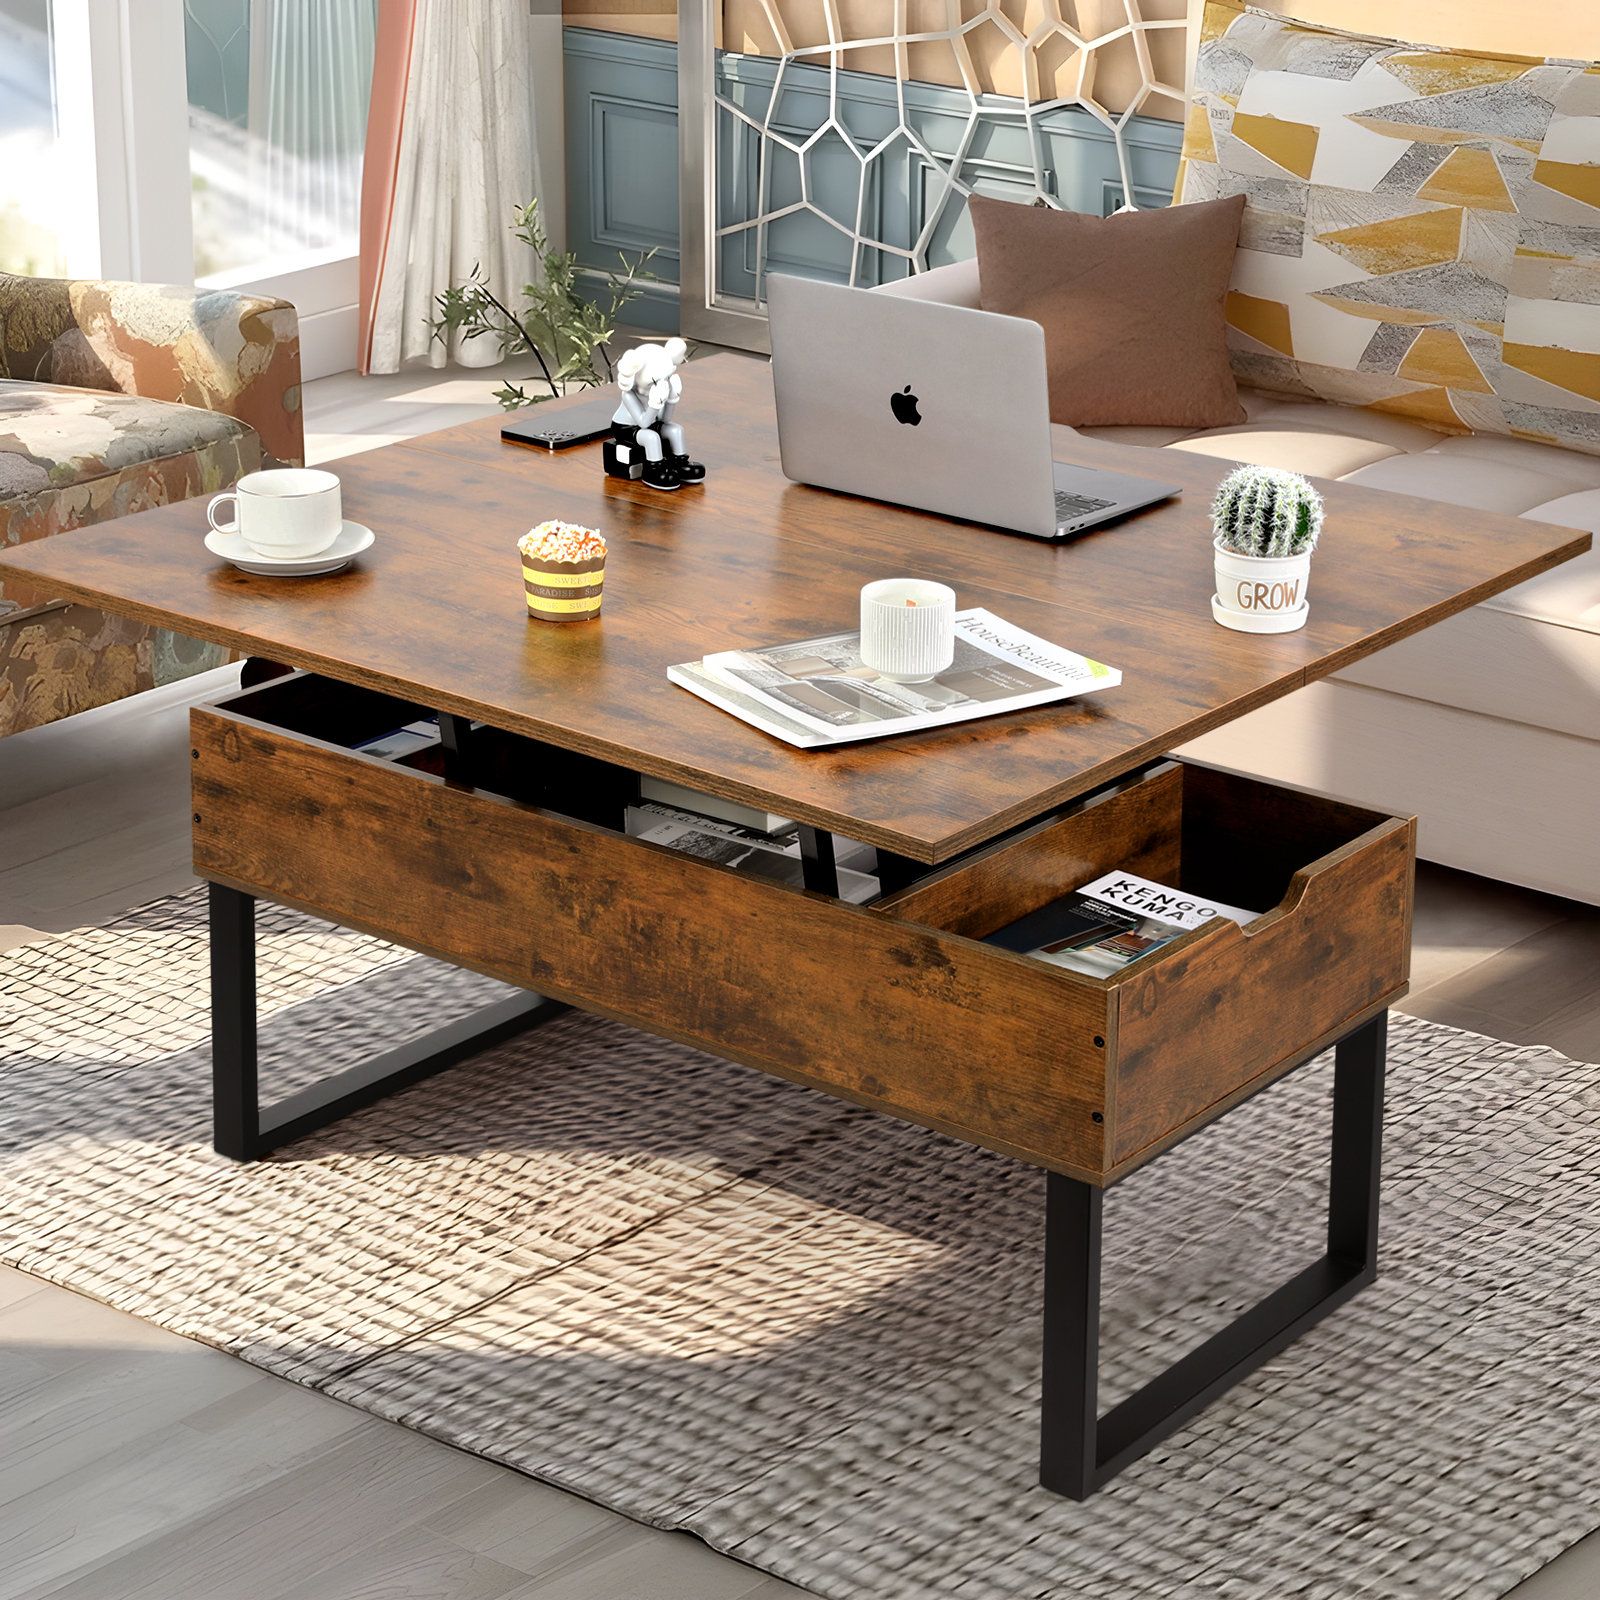 17 Stories Allyssia Lift Top Coffee Table & Reviews | Wayfair With Regard To Wood Lift Top Coffee Tables (View 2 of 15)